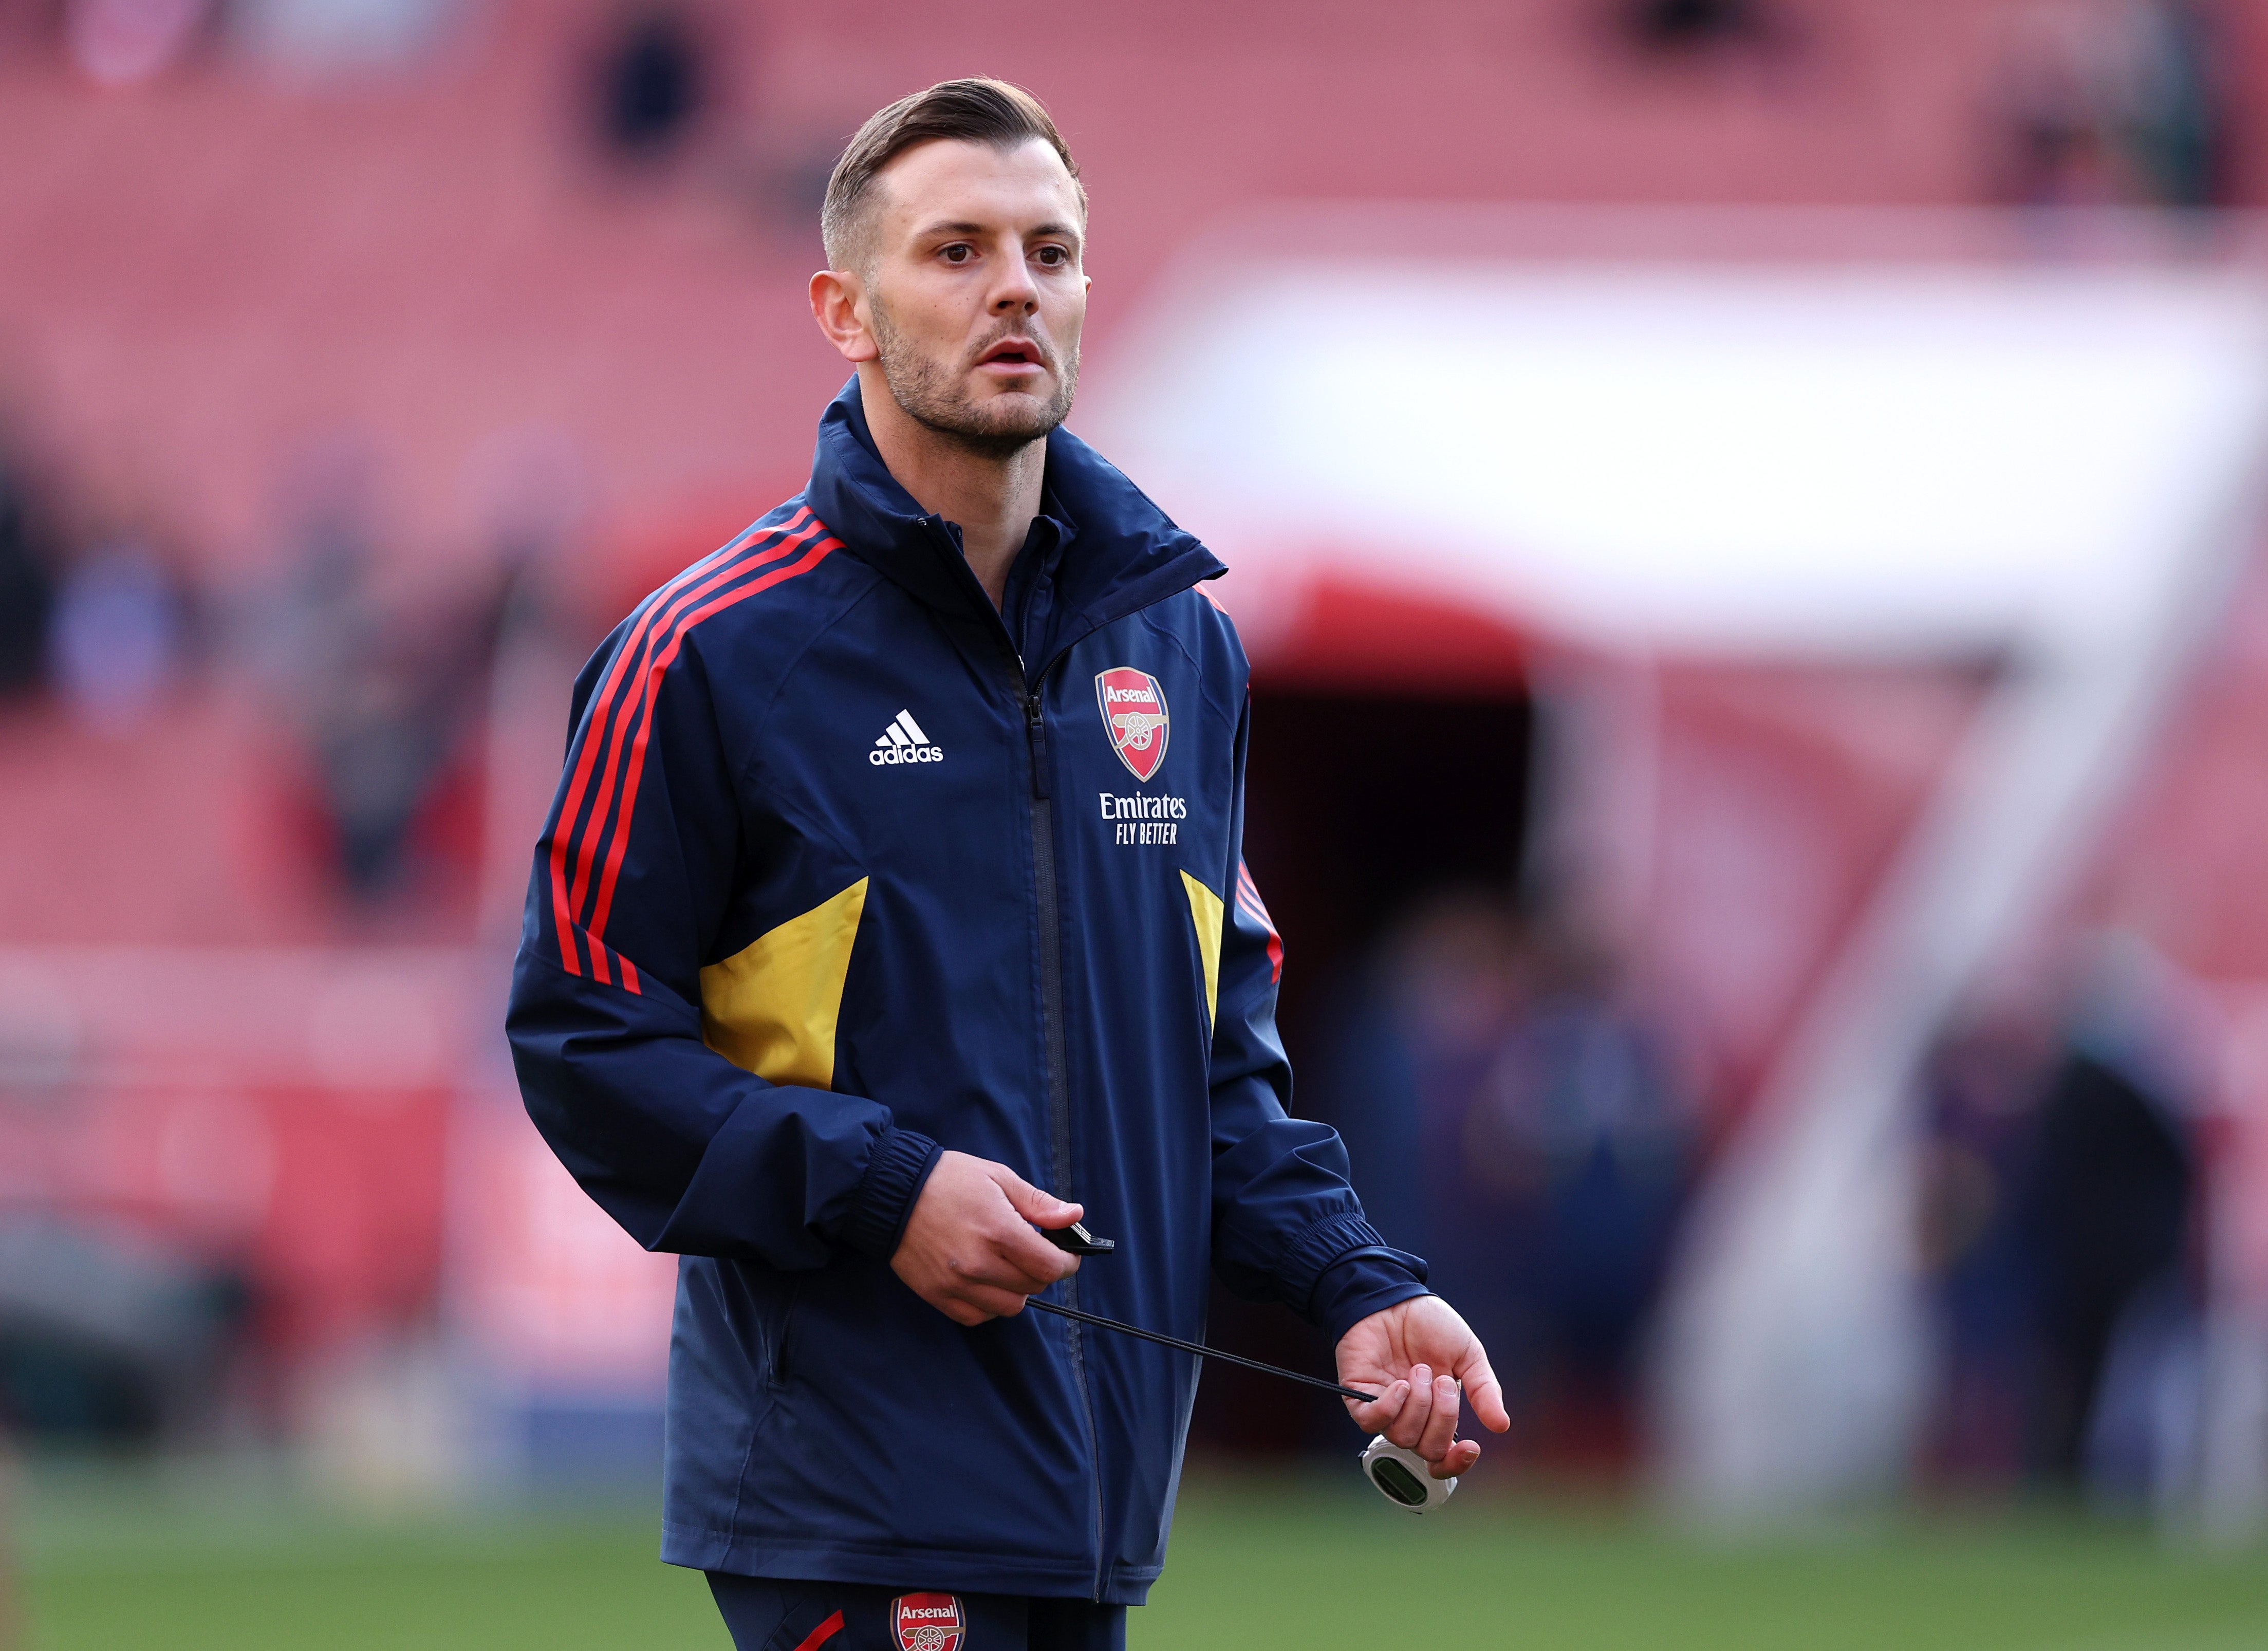 Jack Wilshire is manager of the Arsenal under-18s